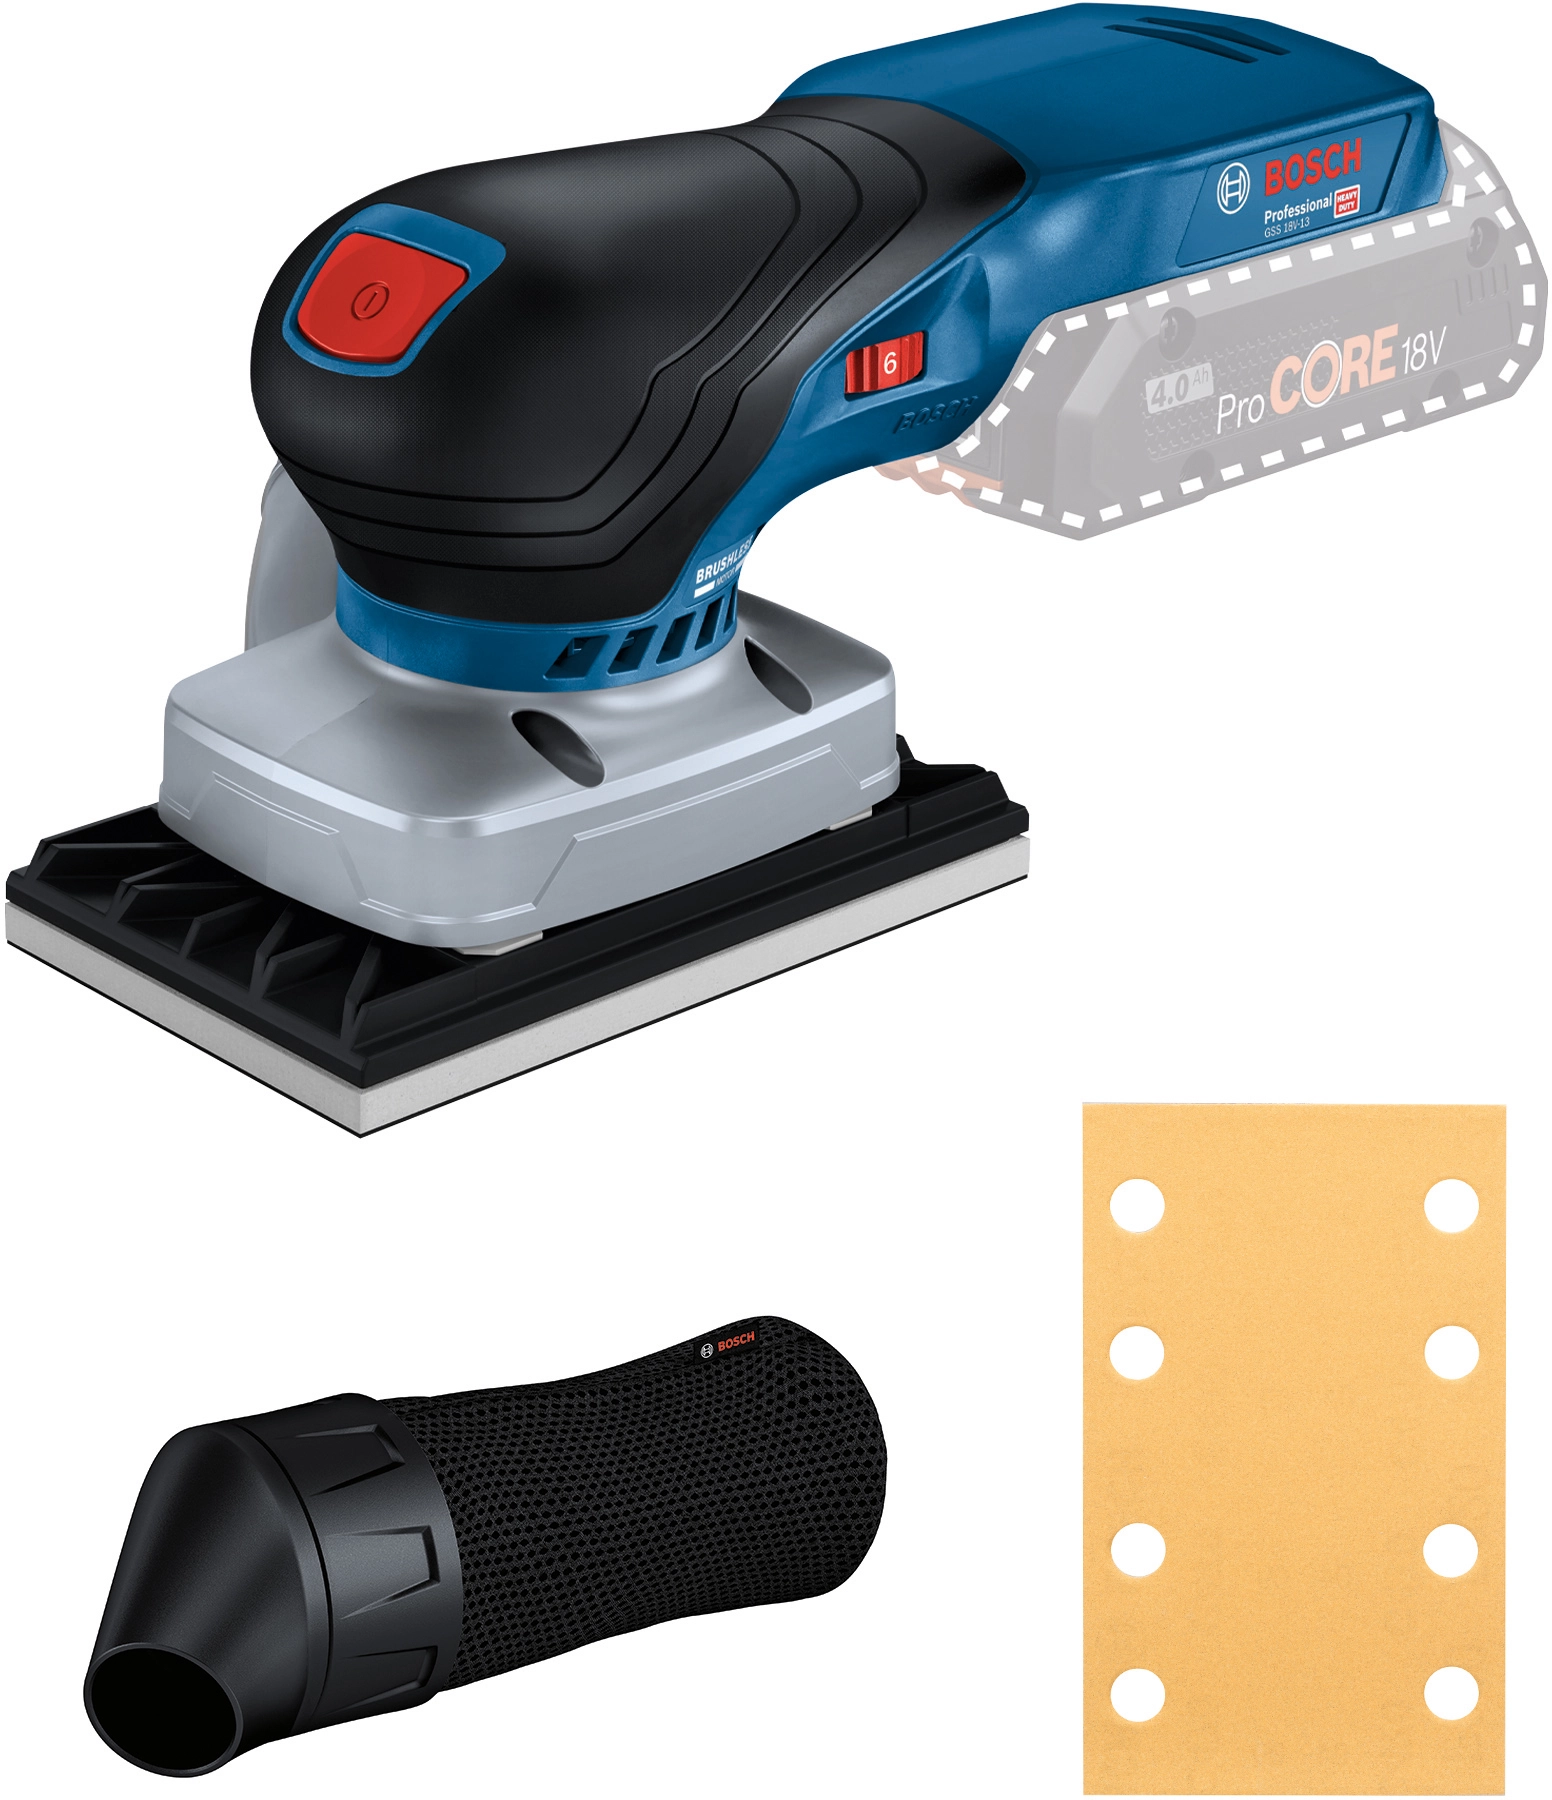 Bosch Professional GEX 18V-125 solo 0601372200 Ponceuse